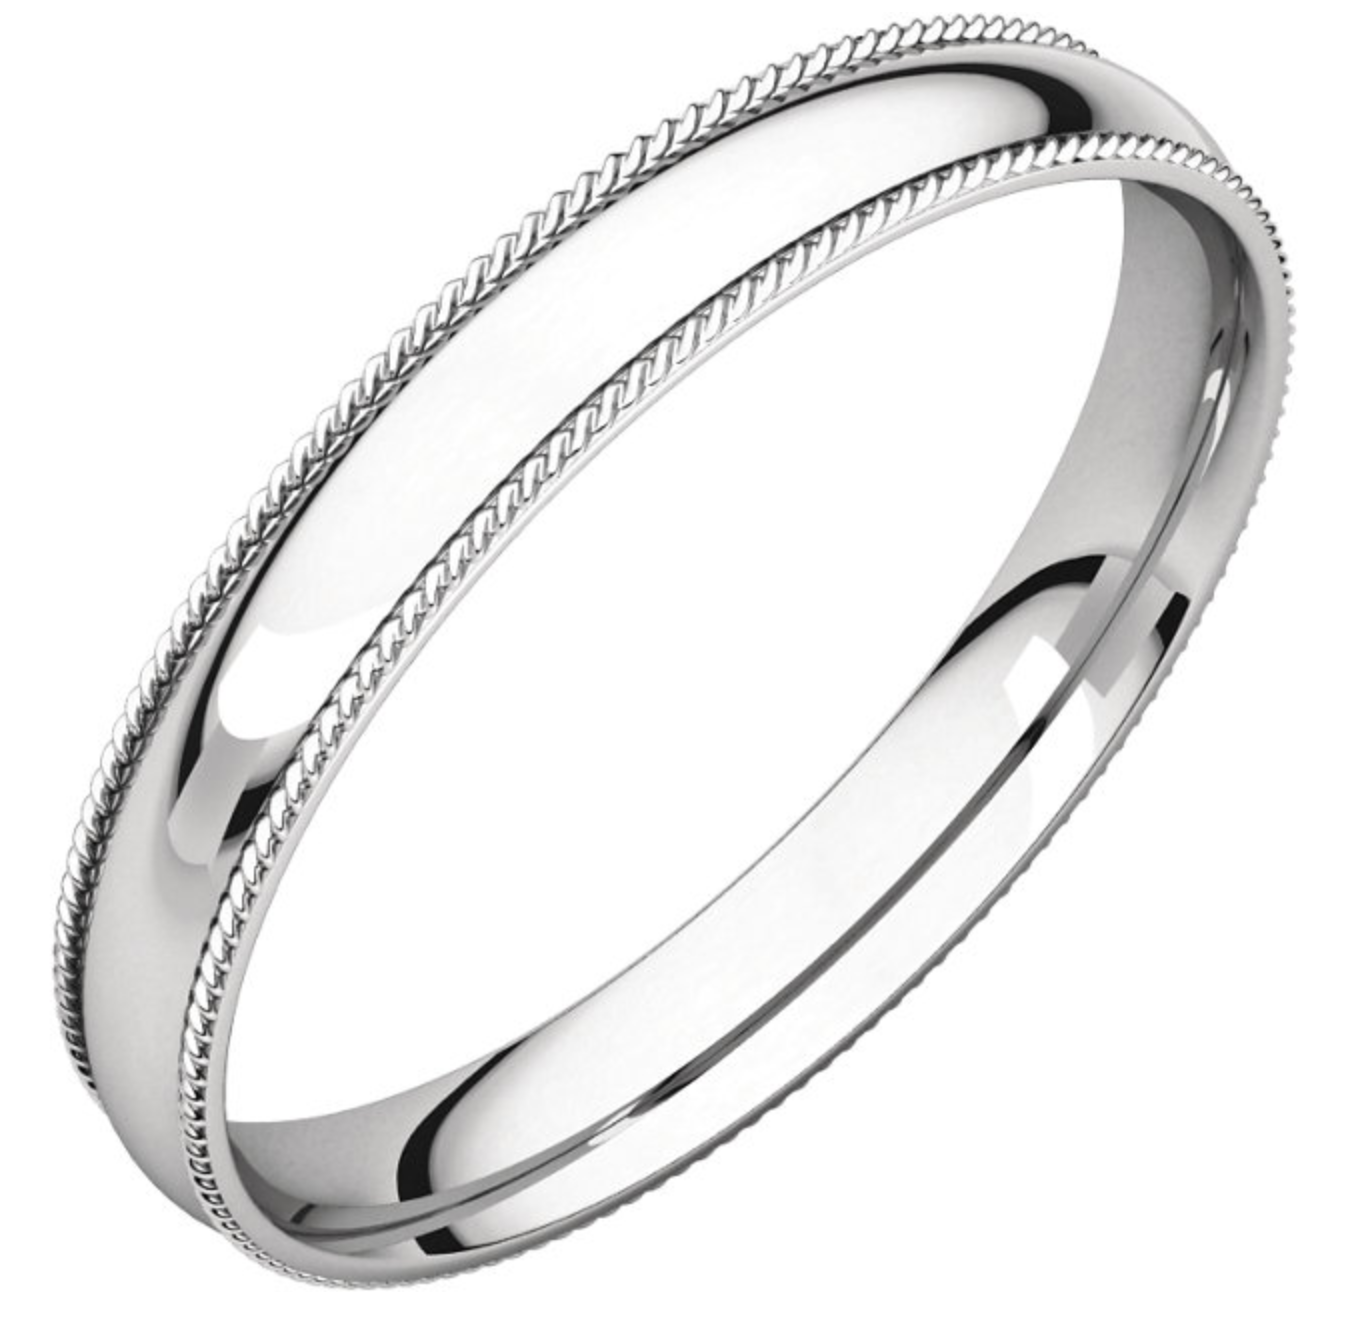 Classic Style Wedding Ring with Rope Edge Detail - Michael E. Minden Diamond Jewelers